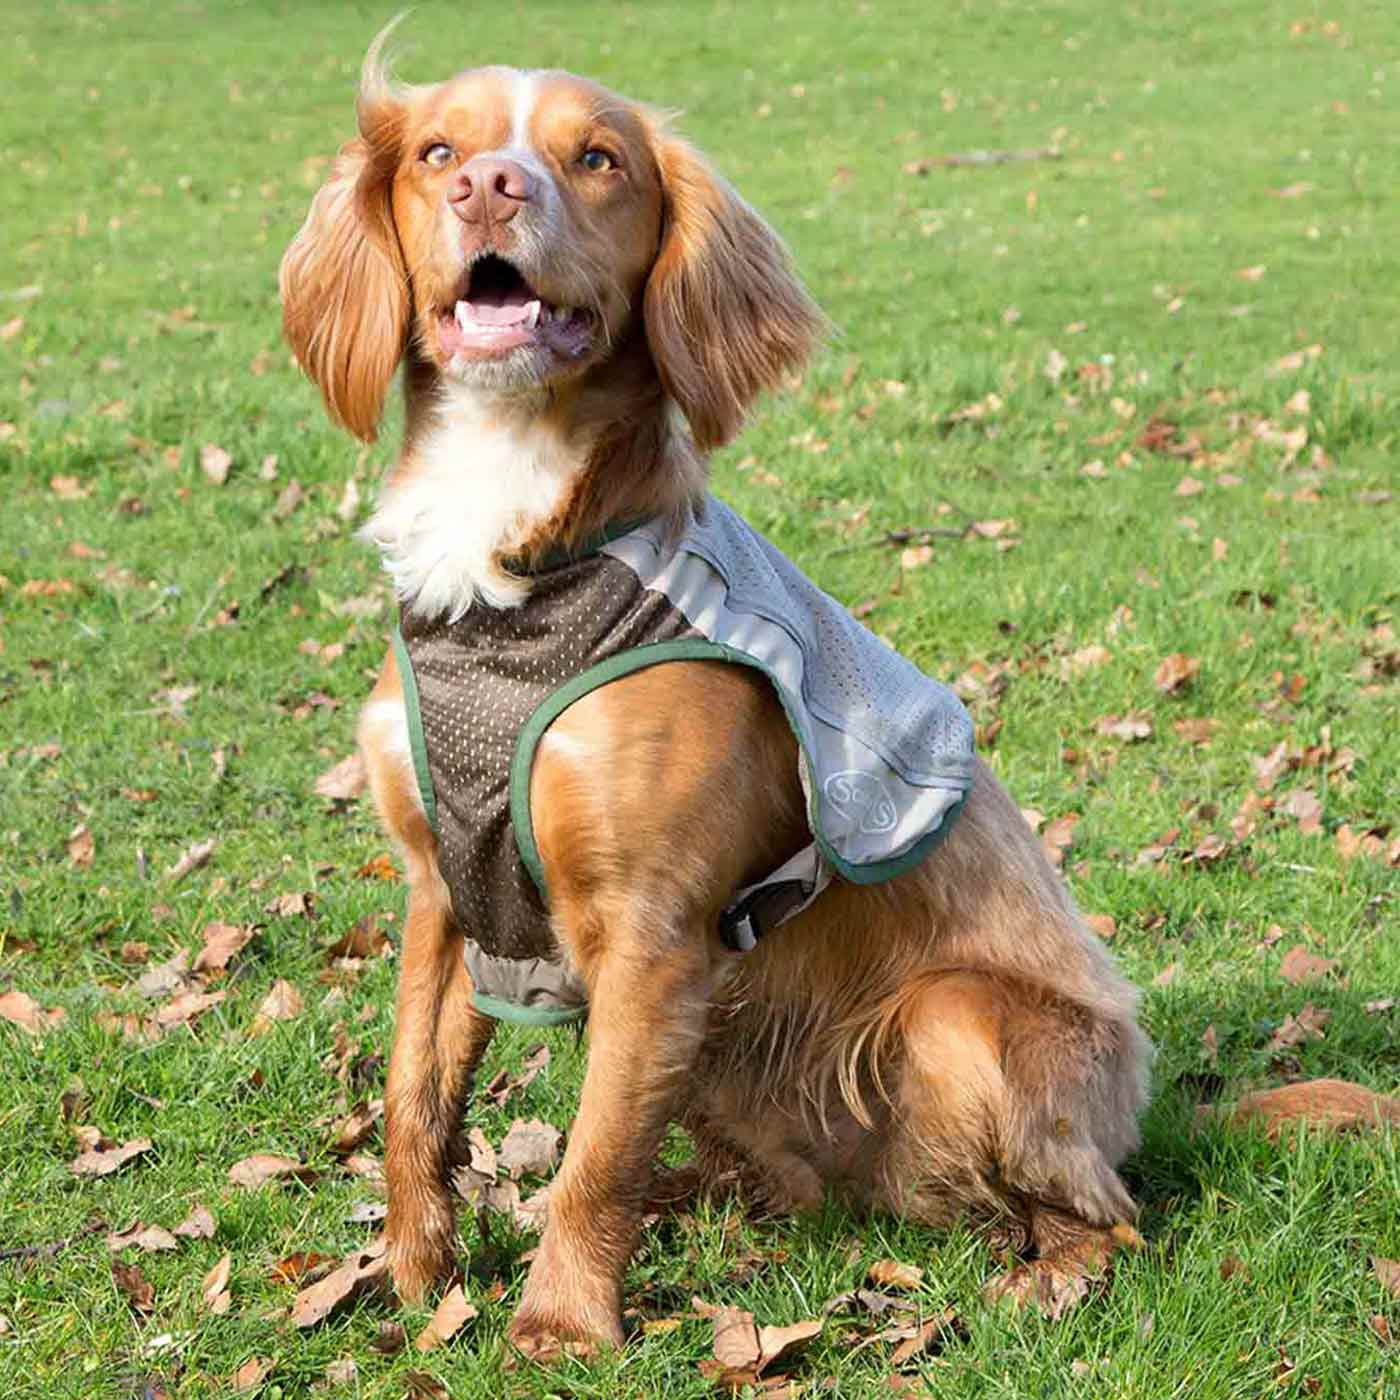 Scruffs Insect Shield Breathable Dog Vest